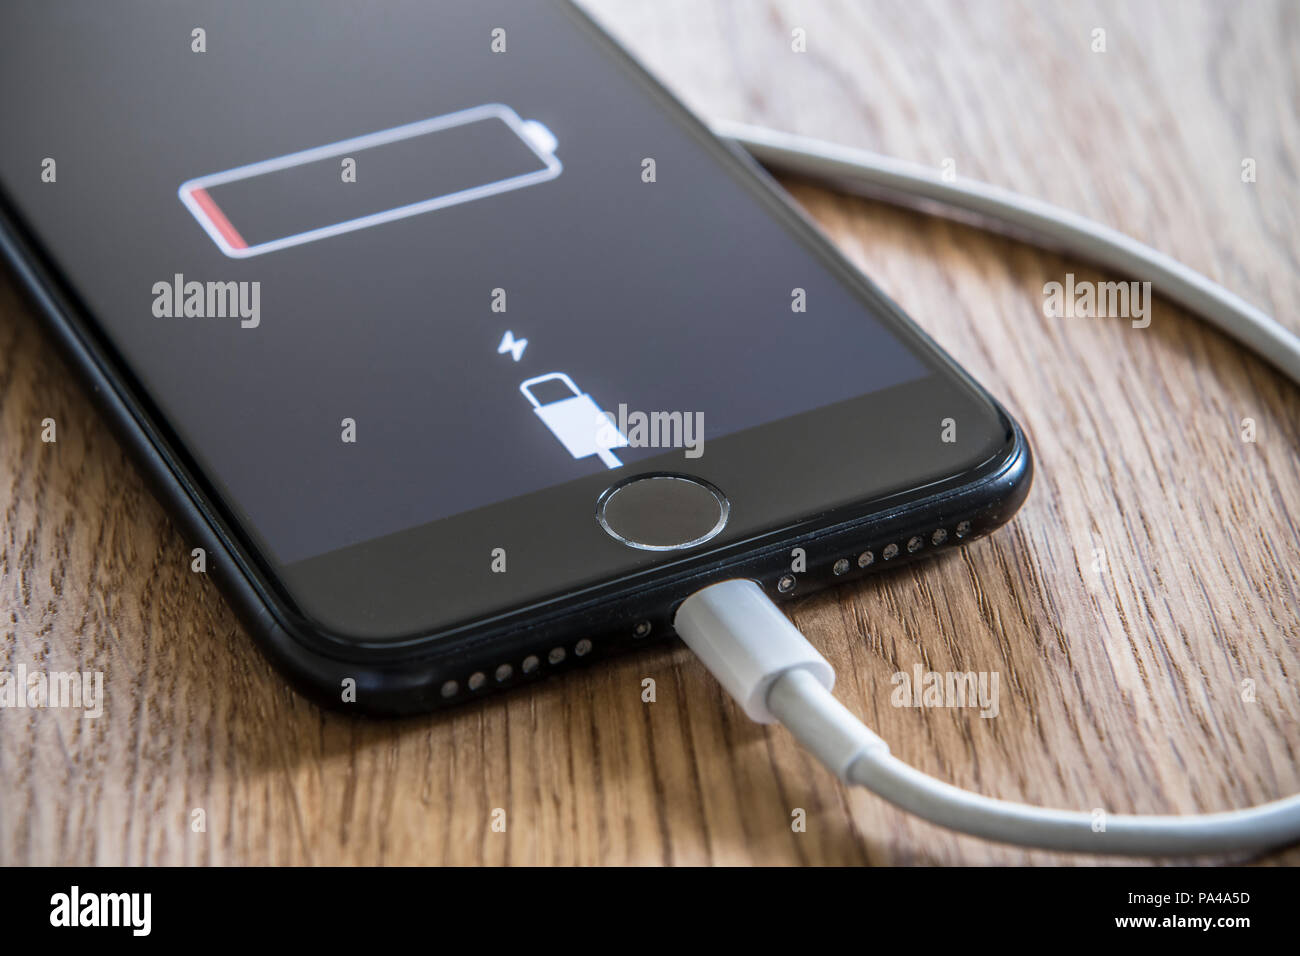 Mobile phone being charged up Stock Photo